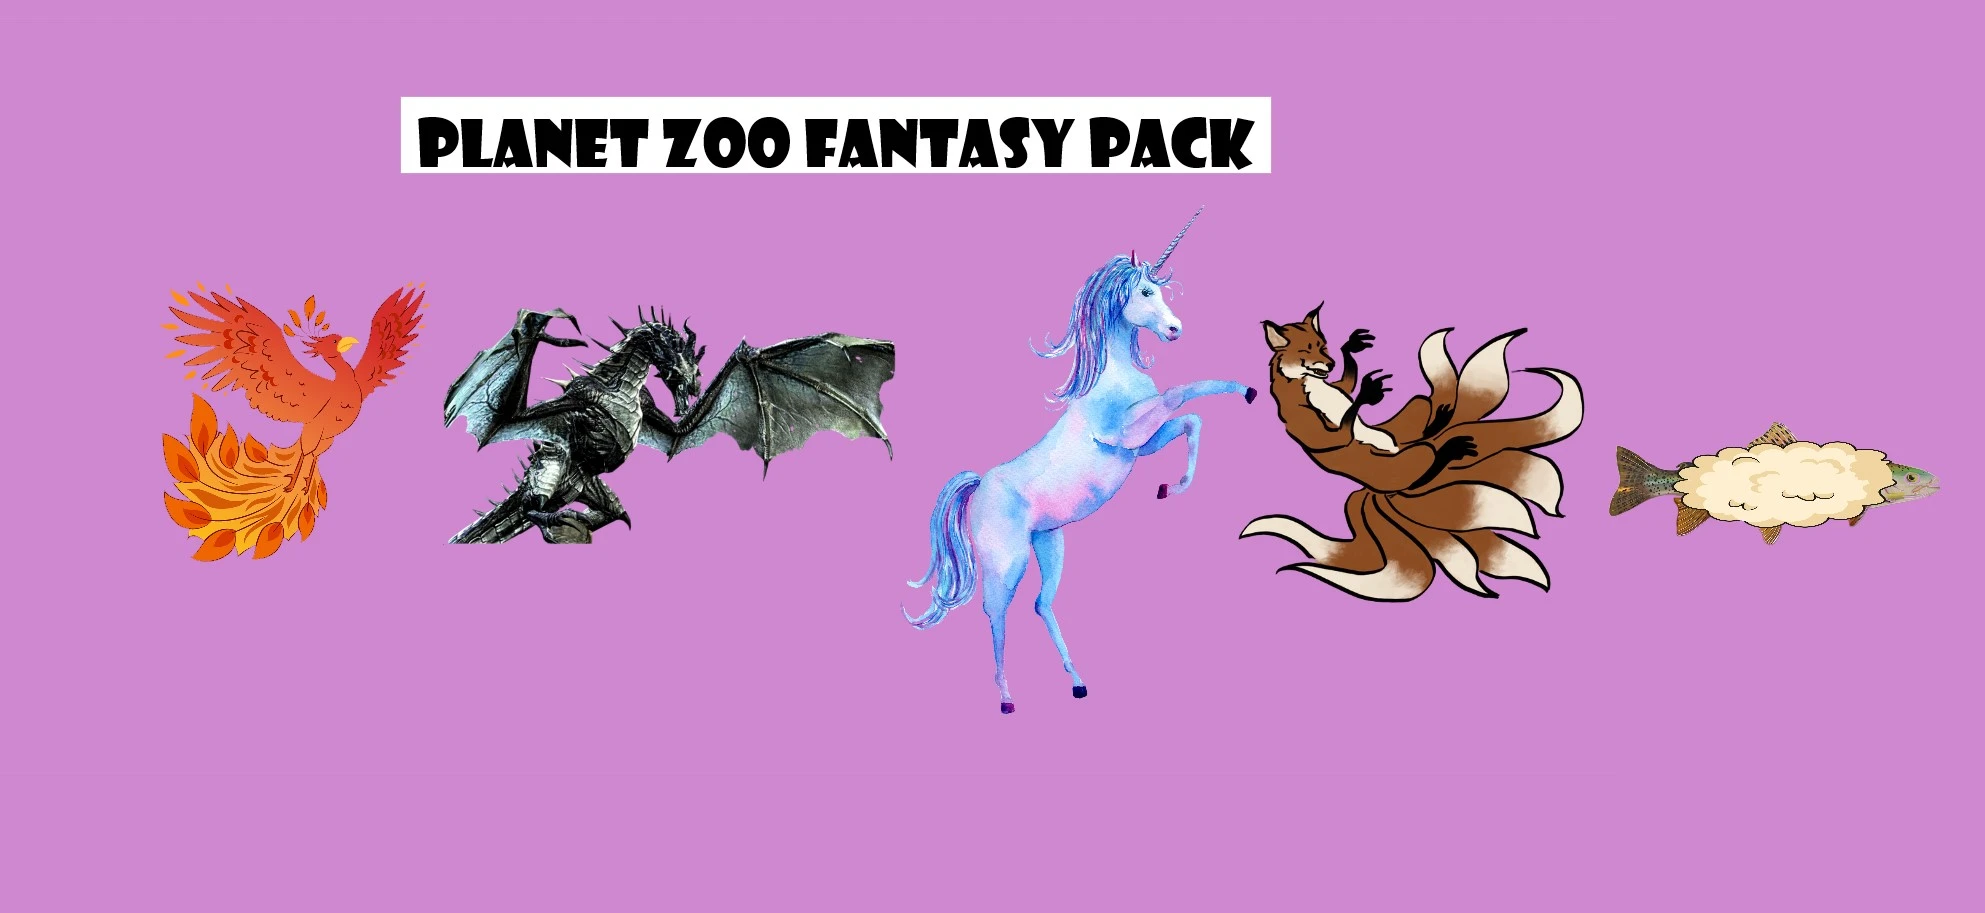 What If We Had A Fantasy Animal Or Scenery Pack at Planet Zoo Nexus - Mods  and community